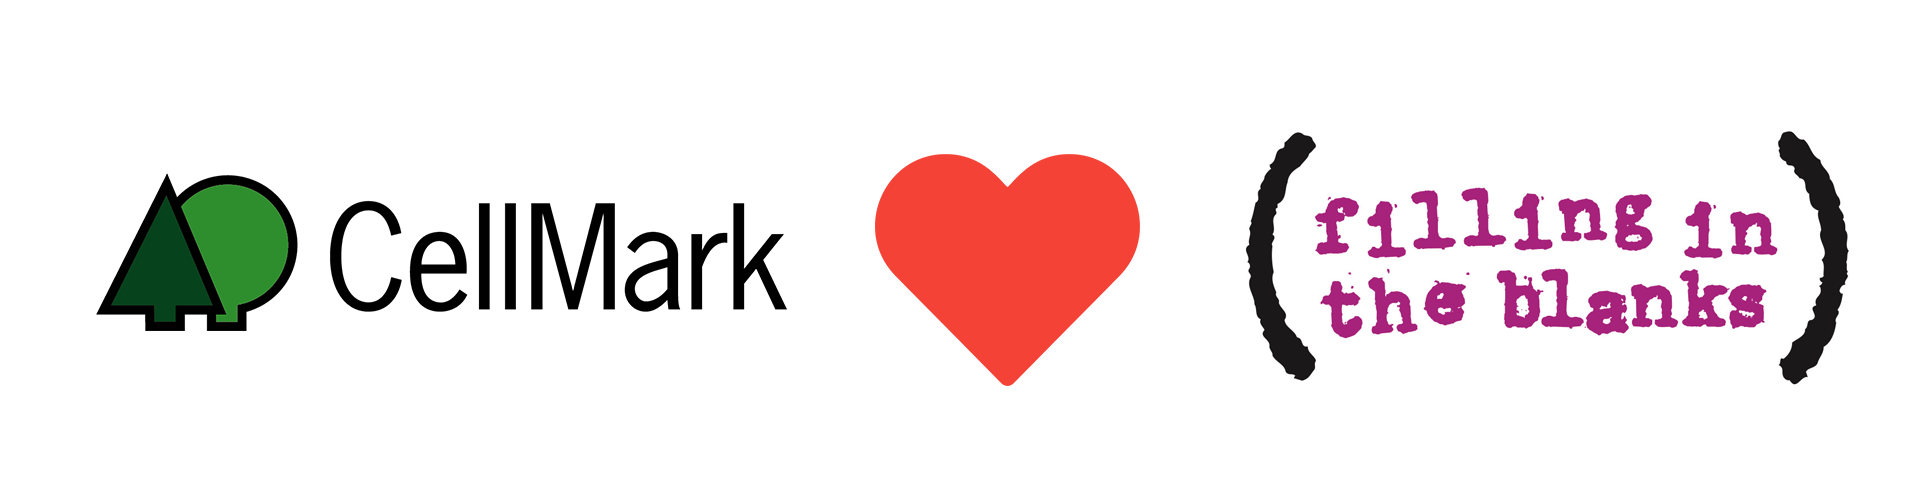 cellmark and filling in the blanks logo in combination with a read heart